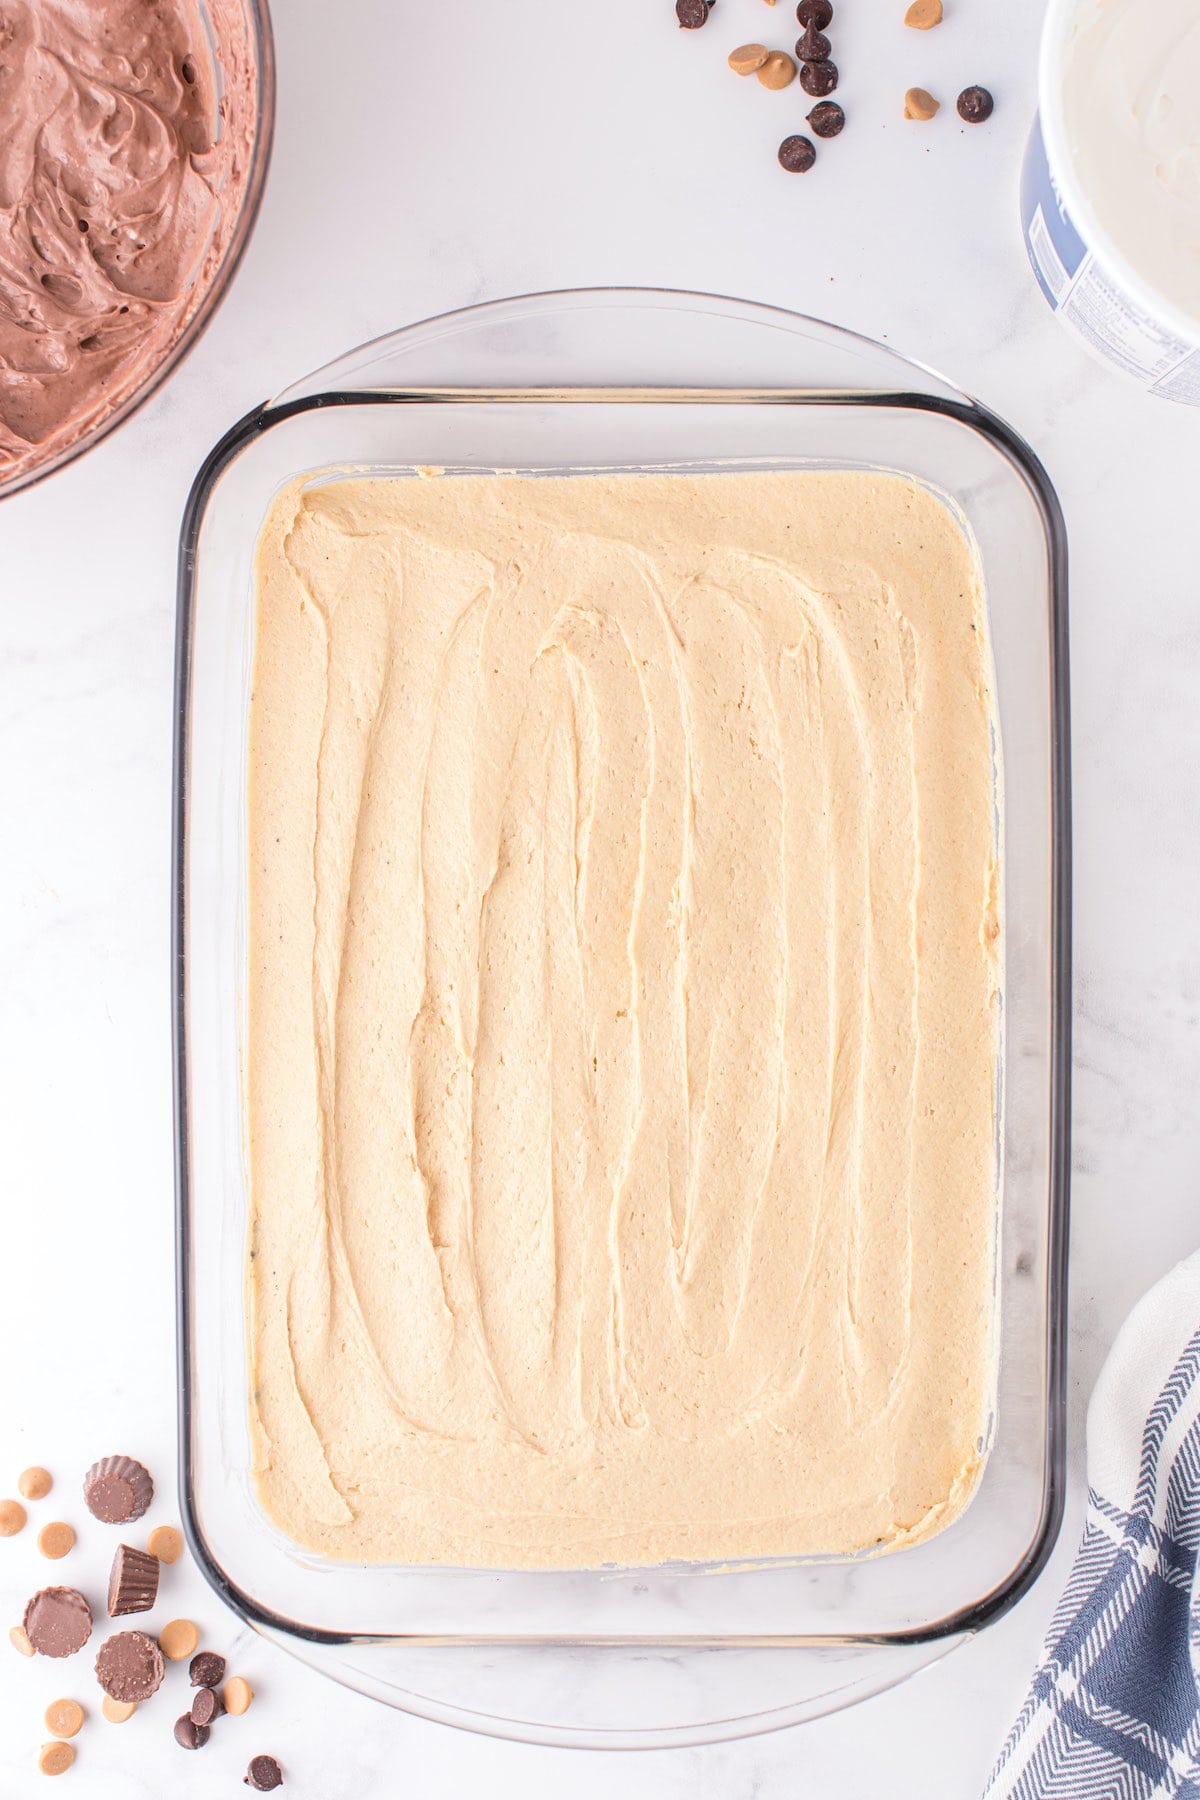 pour peanut butter layer on top of the crust layer